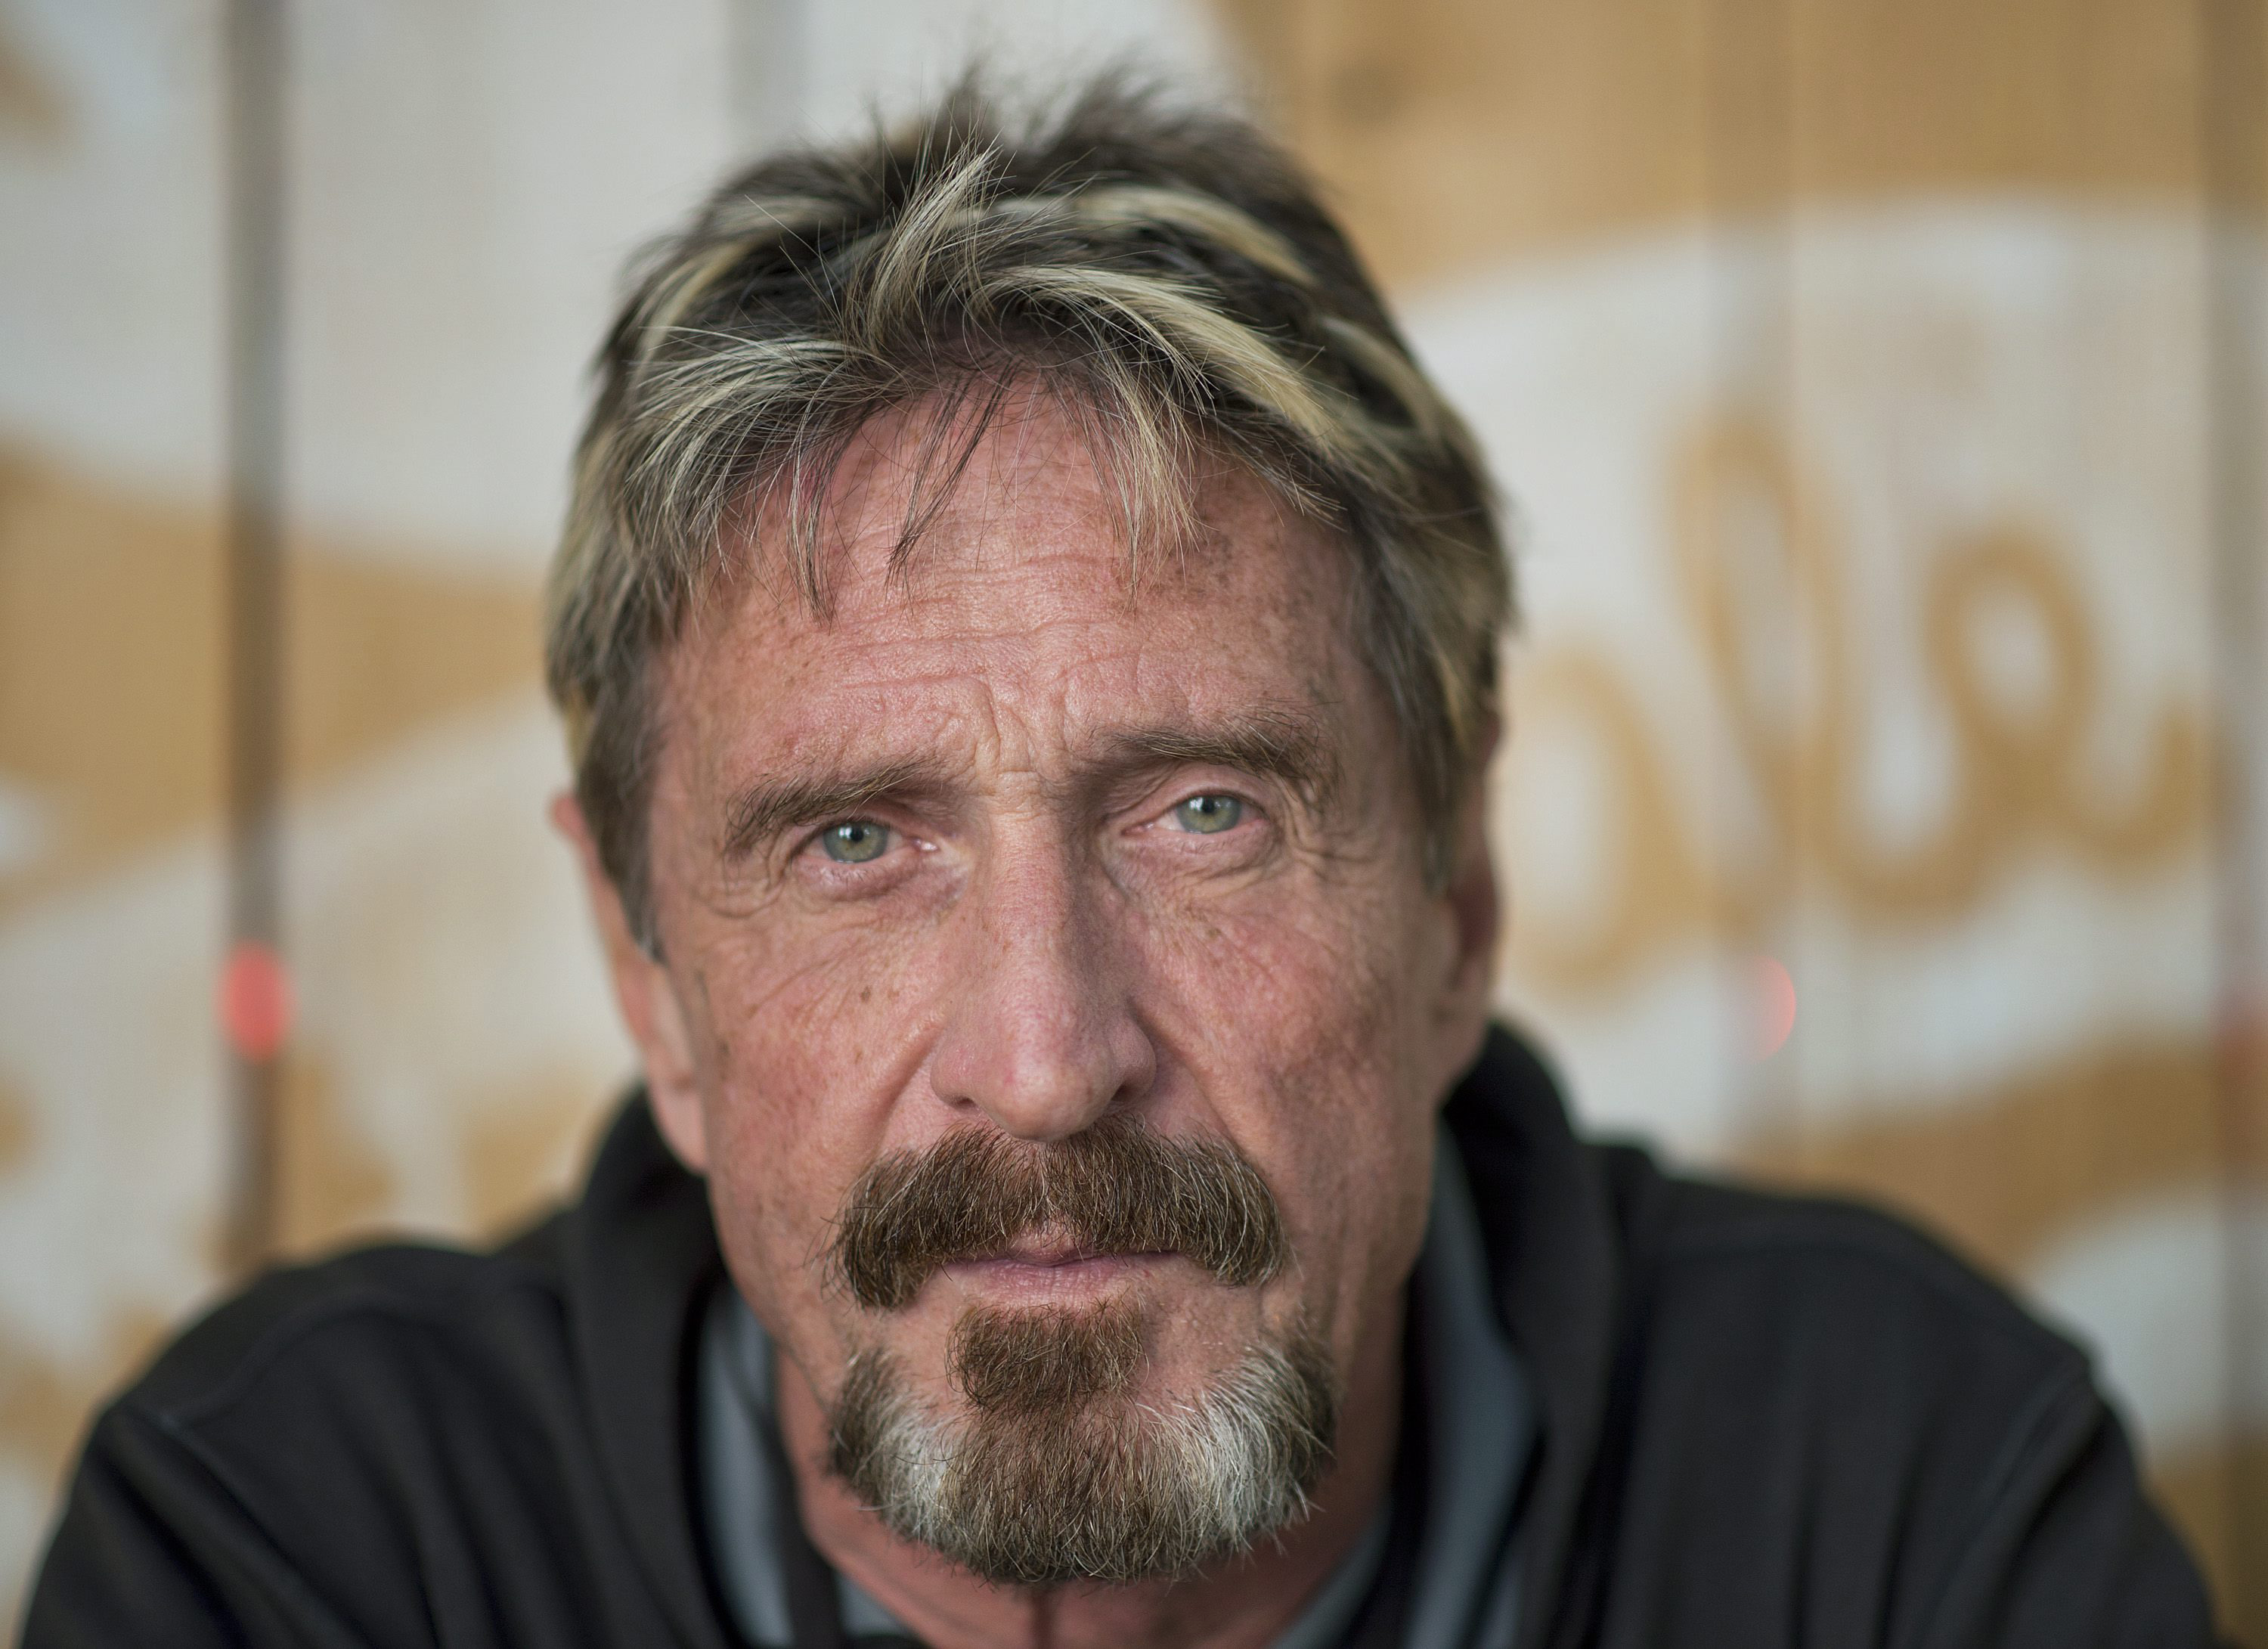 Antivirus pioneer John McAfee poses for a photograph in Montreal on Aug. 24, 2013. (Graham Hughes—AP)